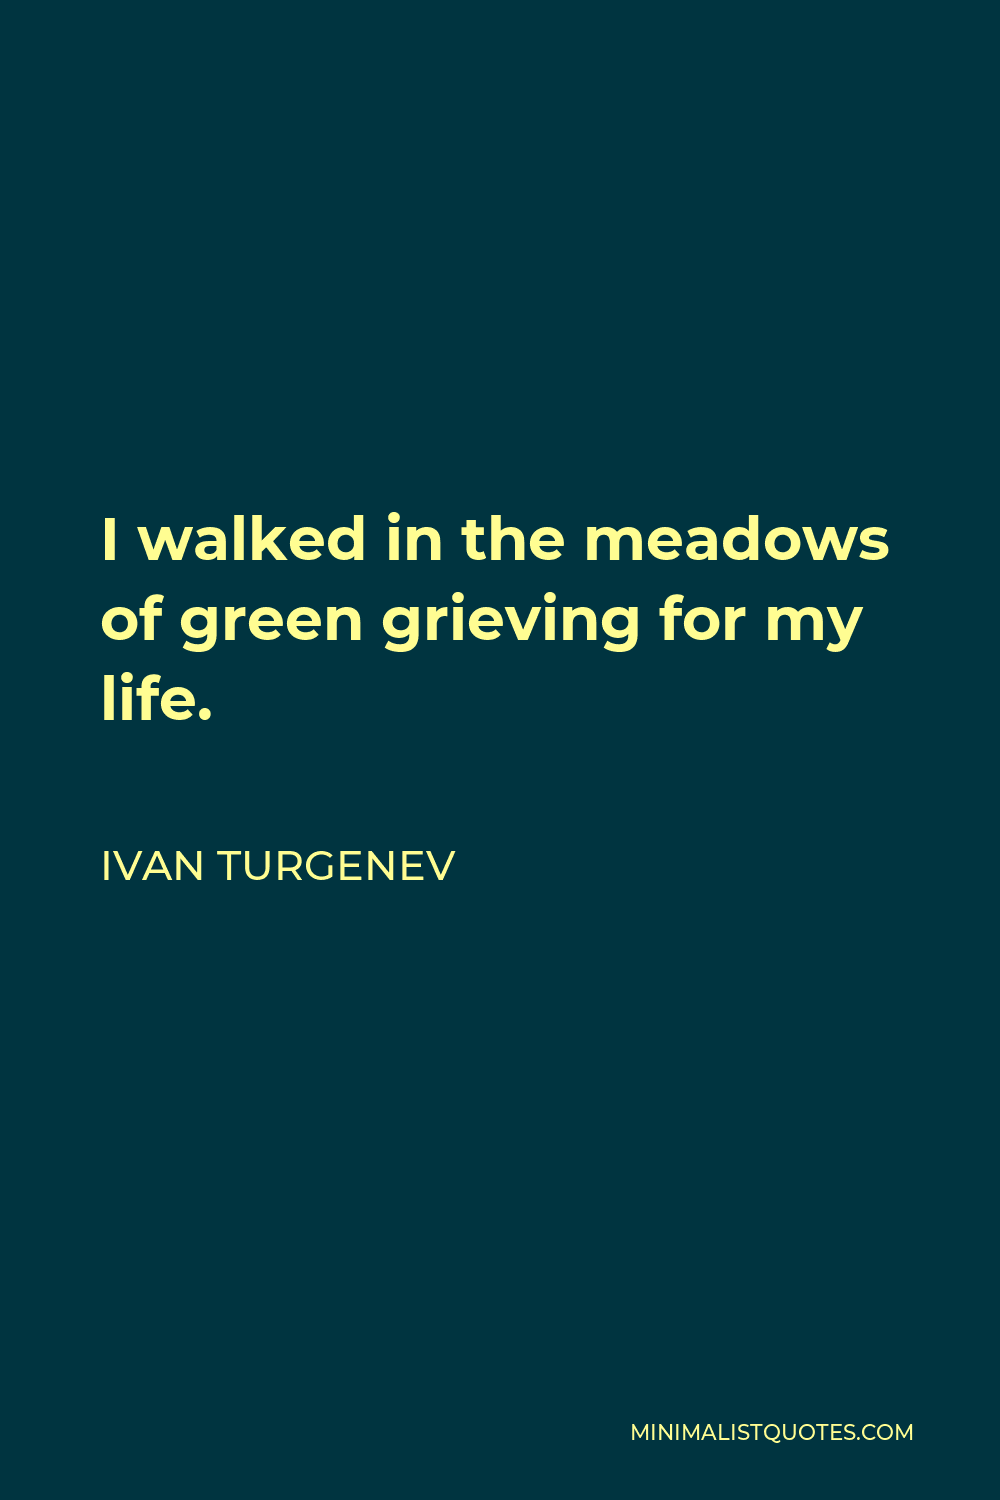 Ivan Turgenev Quote - I walked in the meadows of green grieving for my life.